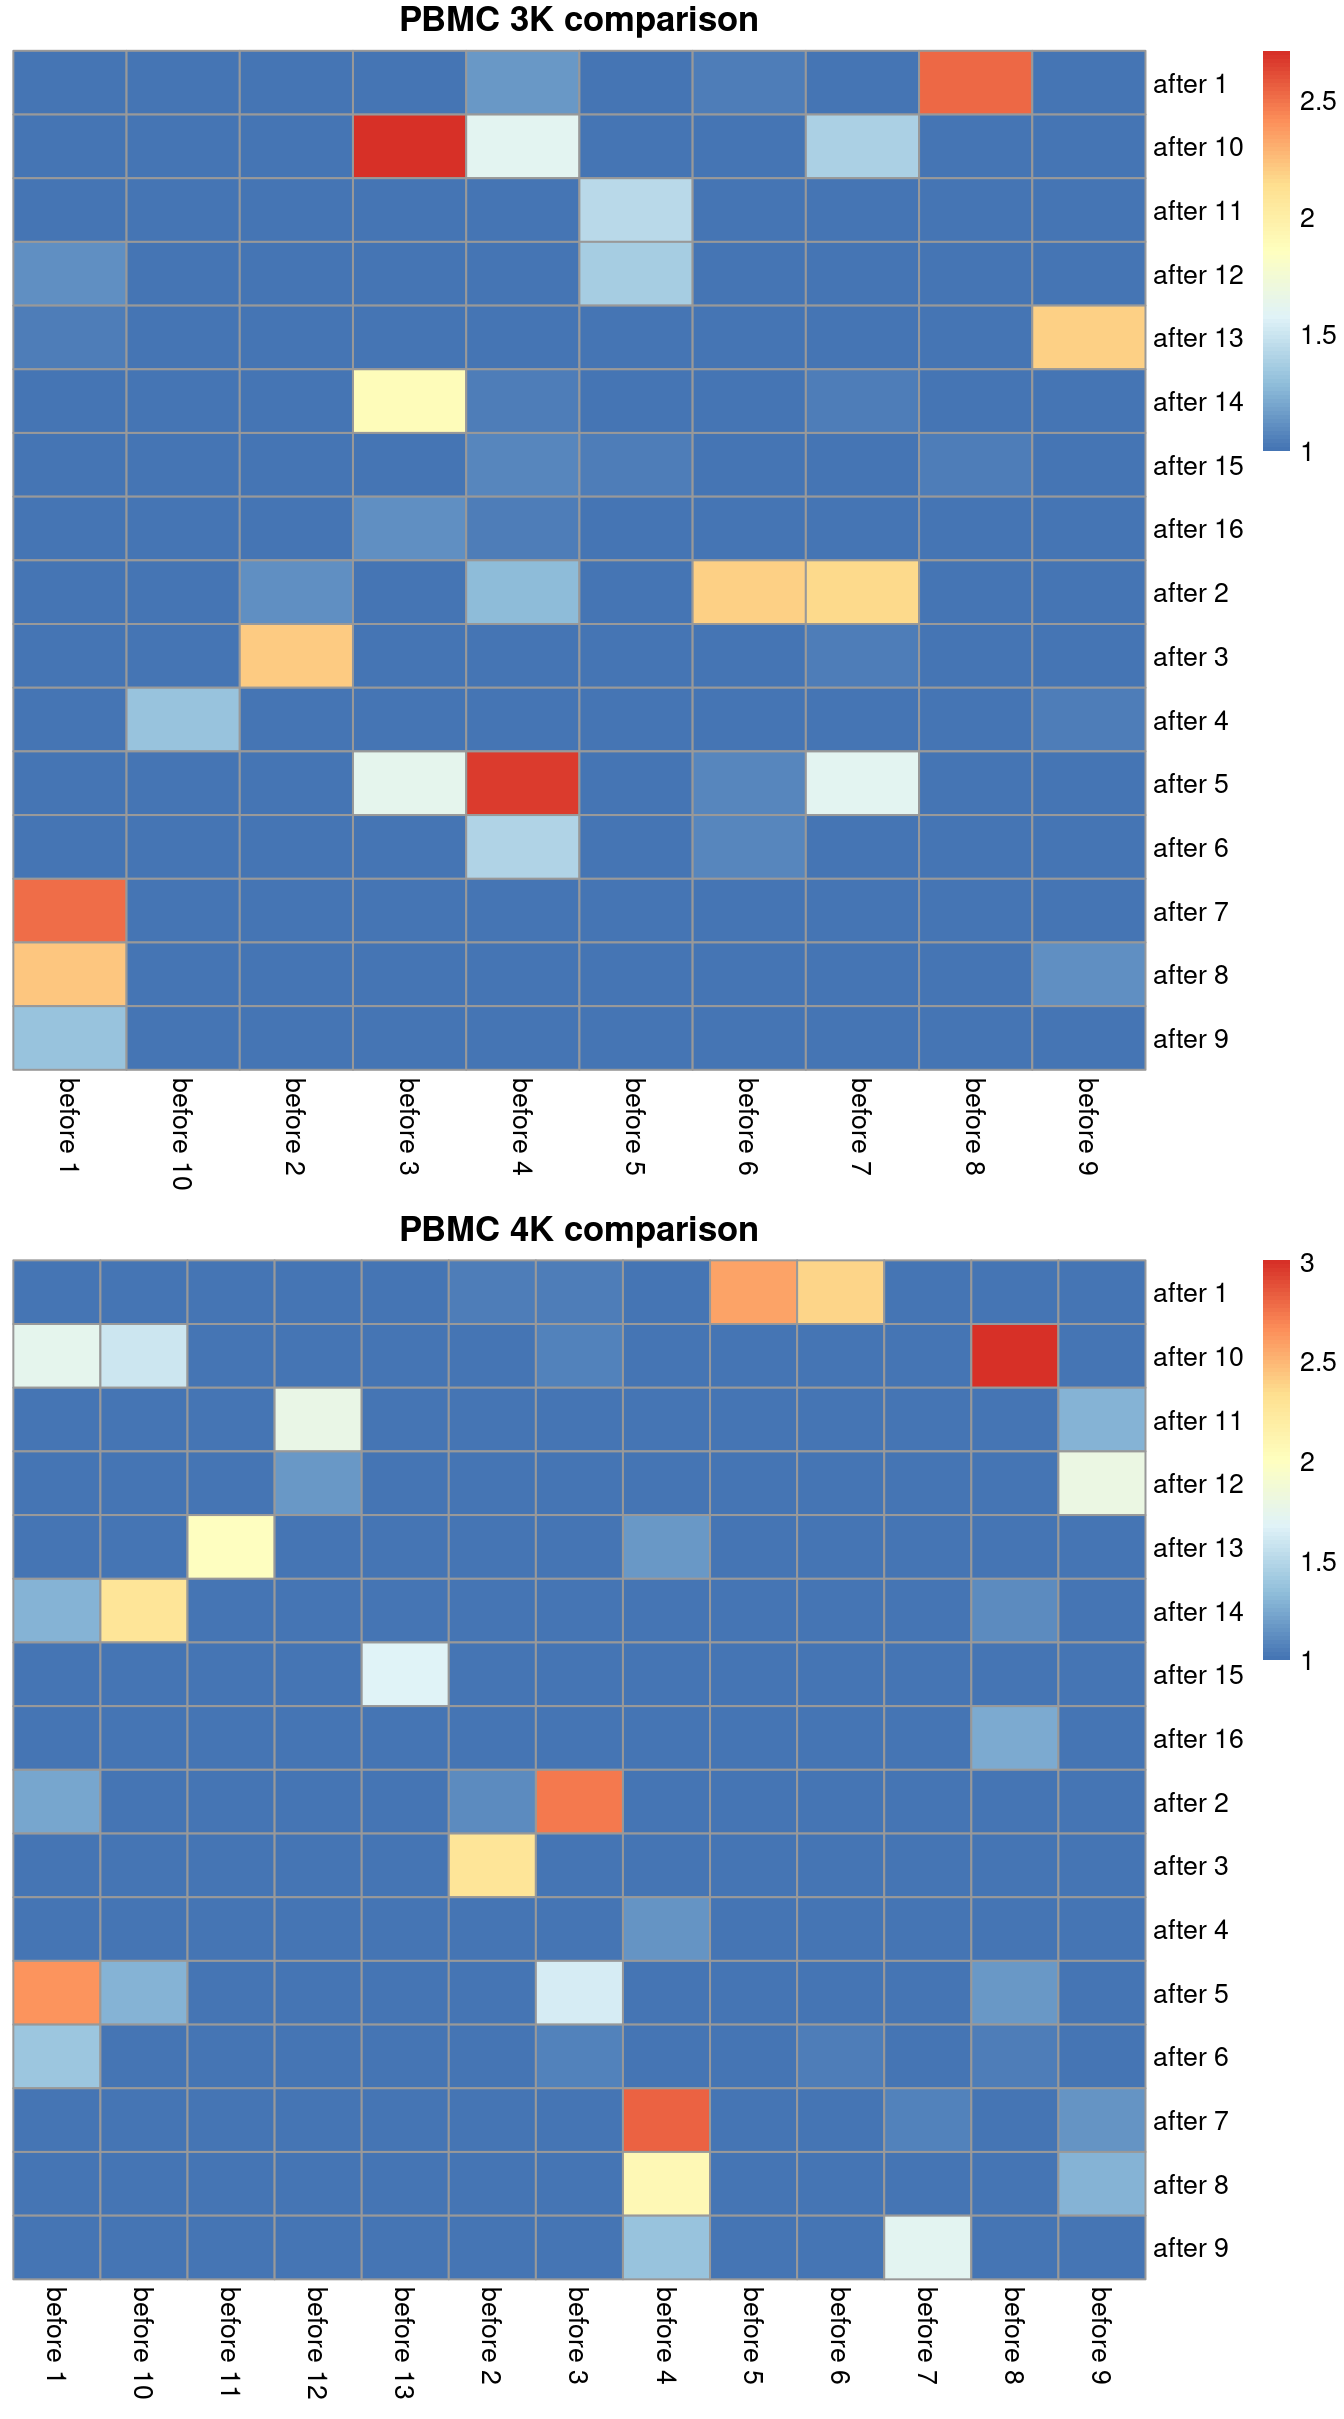 Comparison between the within-batch clusters and the across-batch clusters obtained after MNN correction. One heatmap is generated for each of the PBMC 3K and 4K datasets, where each entry is colored according to the number of cells with each pair of labels (before and after correction).